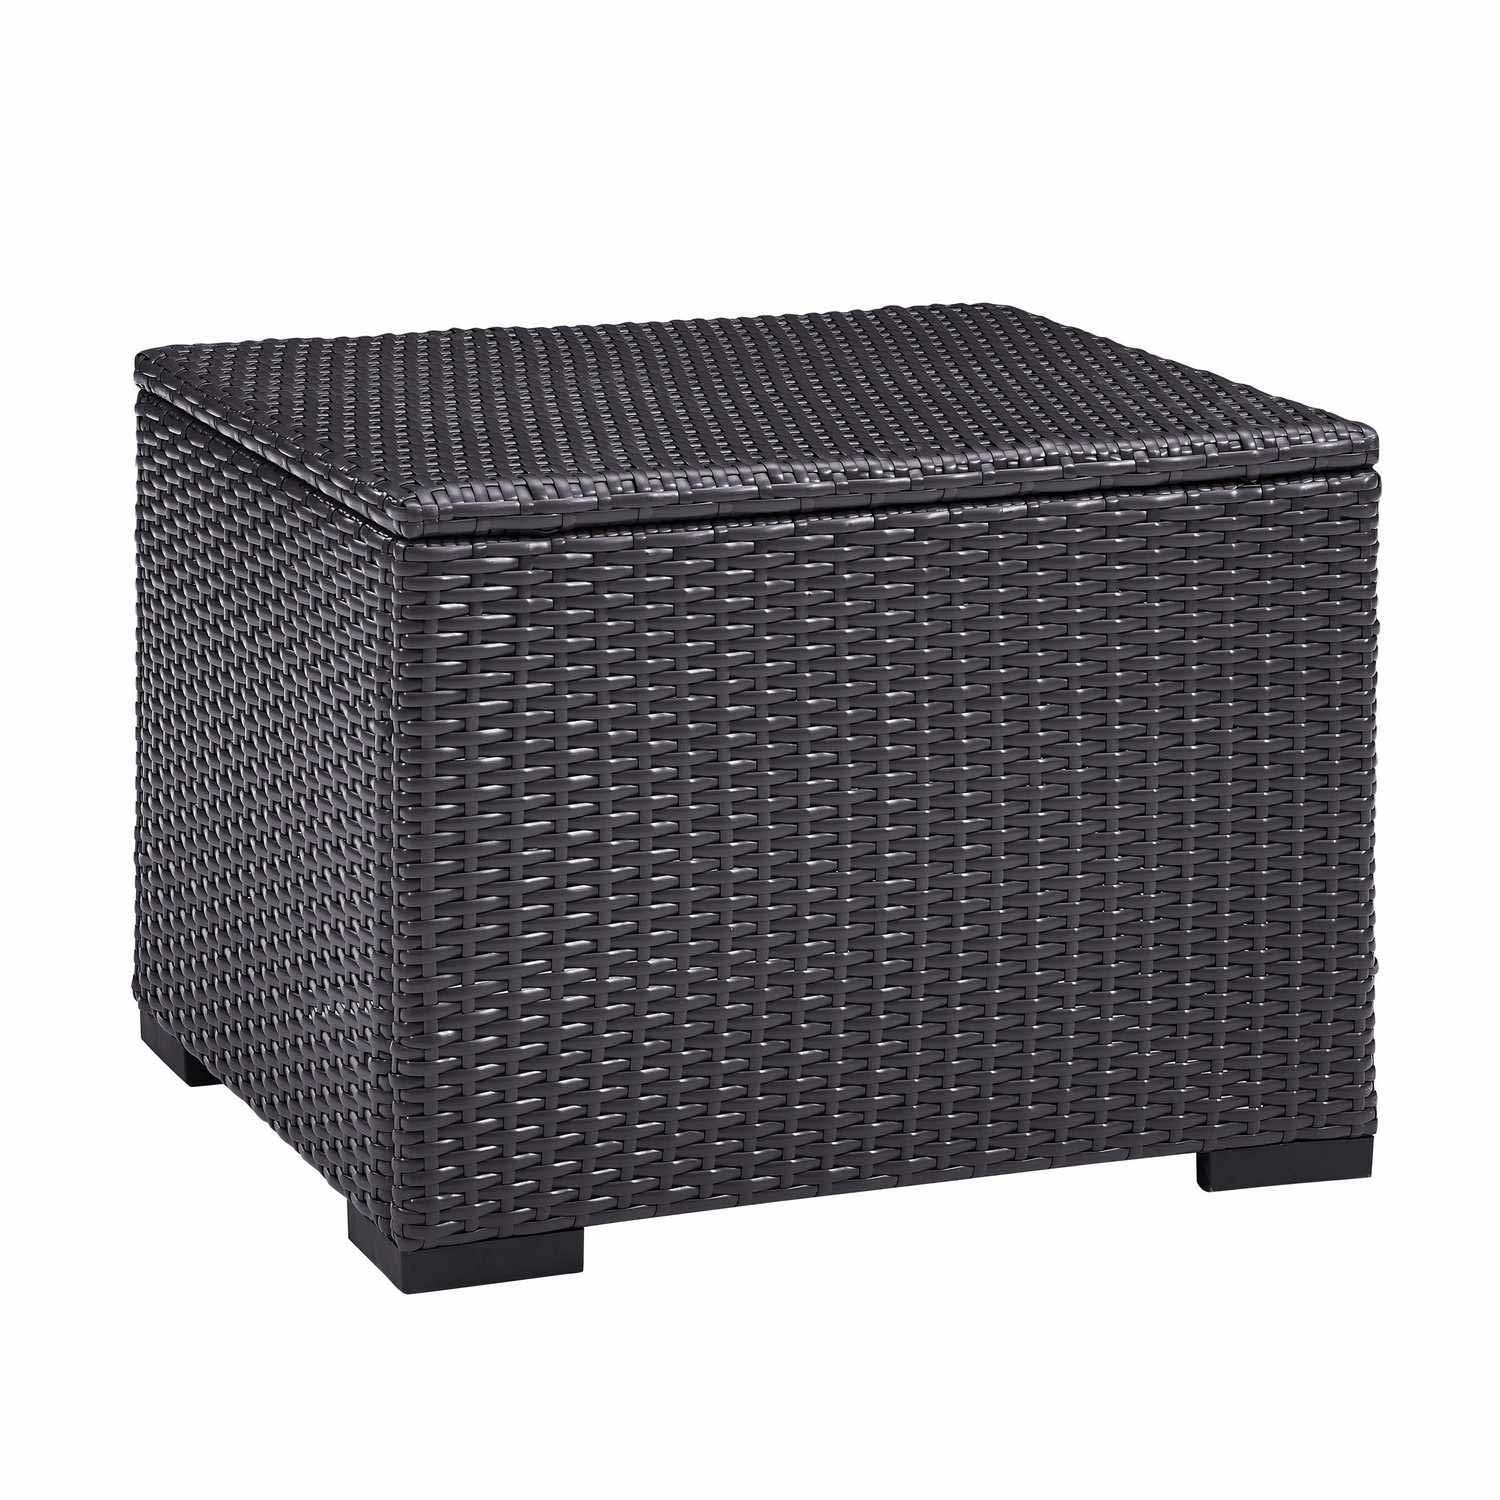 Crosley Biscayne Outdoor Wicker Coffee Table - Brown